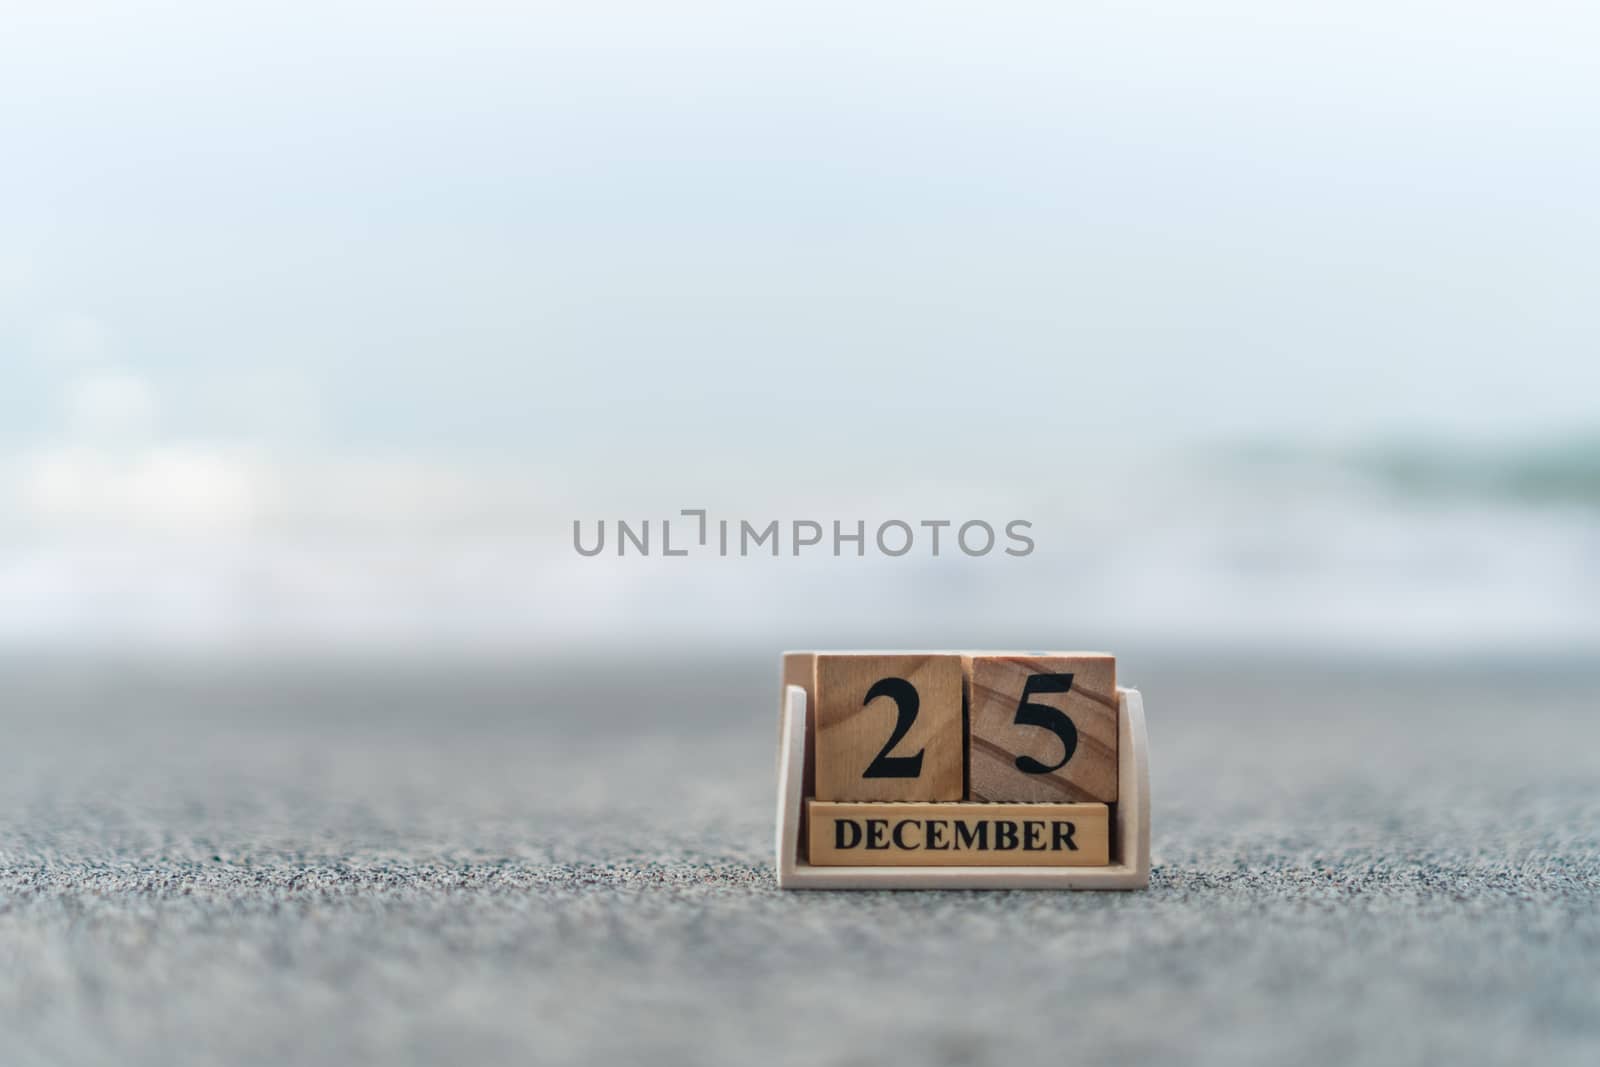 Wood brick block show date and month calendar of 25th December or Chritstmas day. Celebration and holiday long weekend season concept.